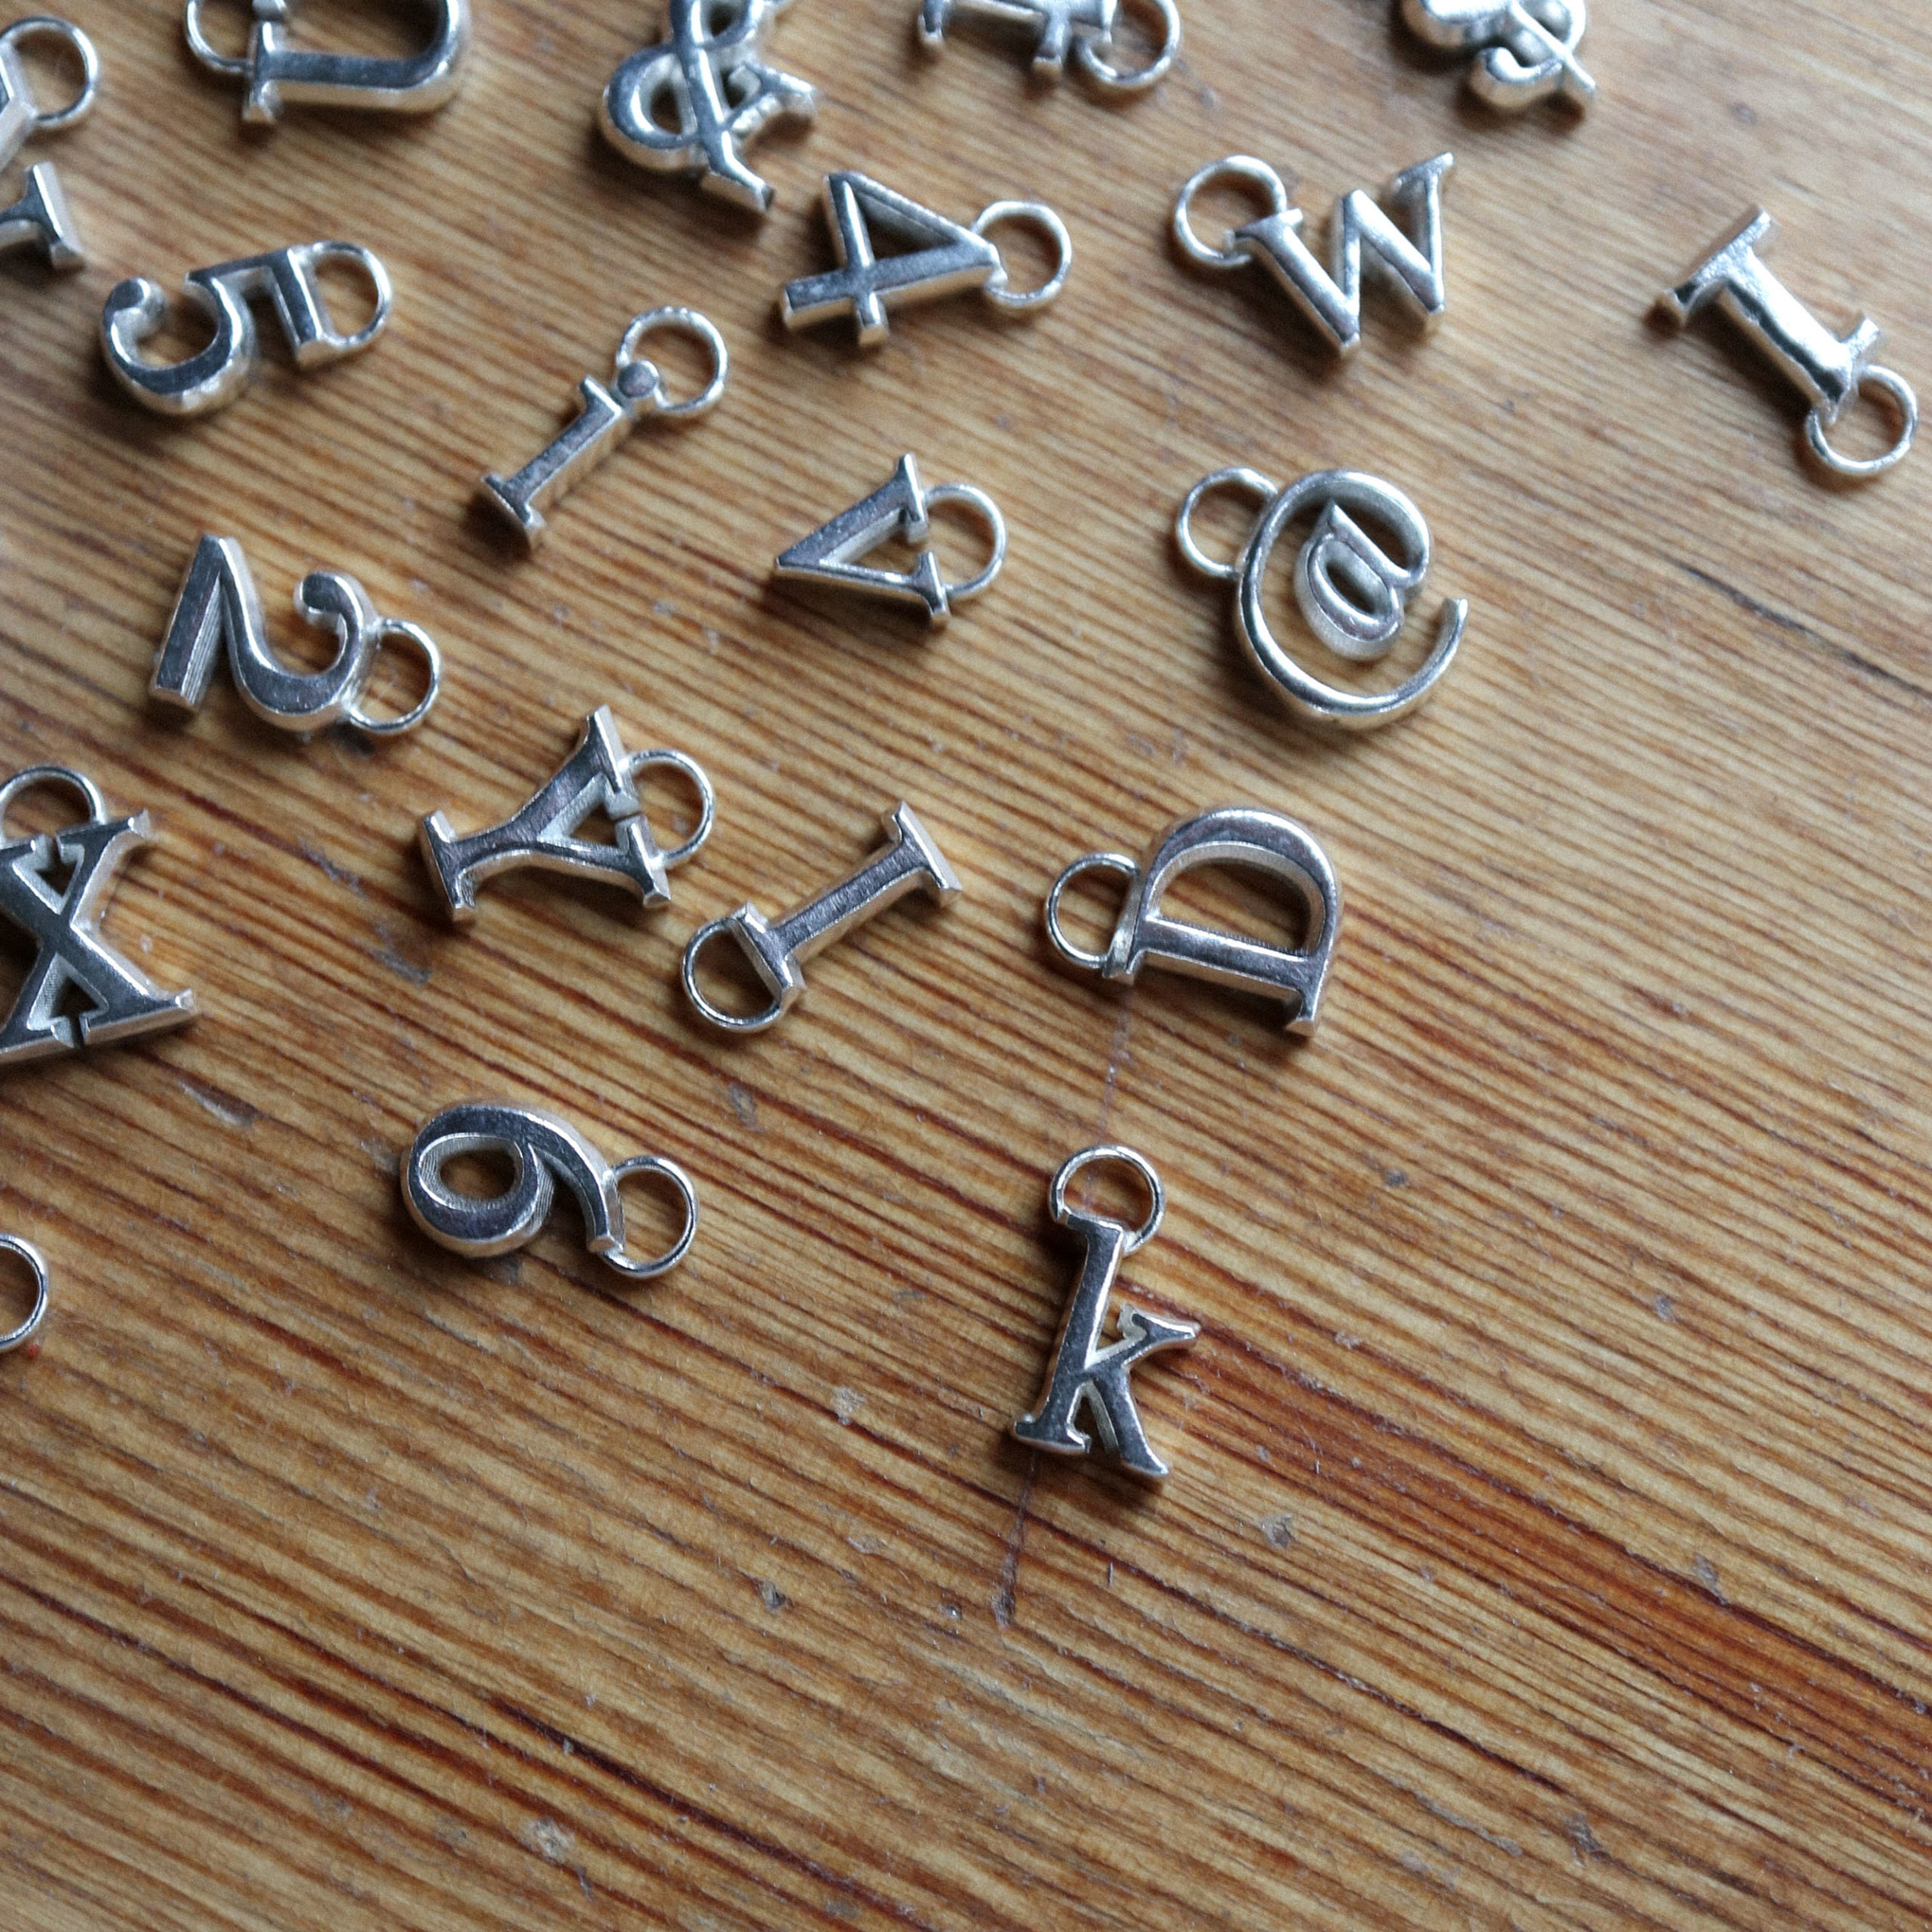 Letter, Number, and symbol pendants